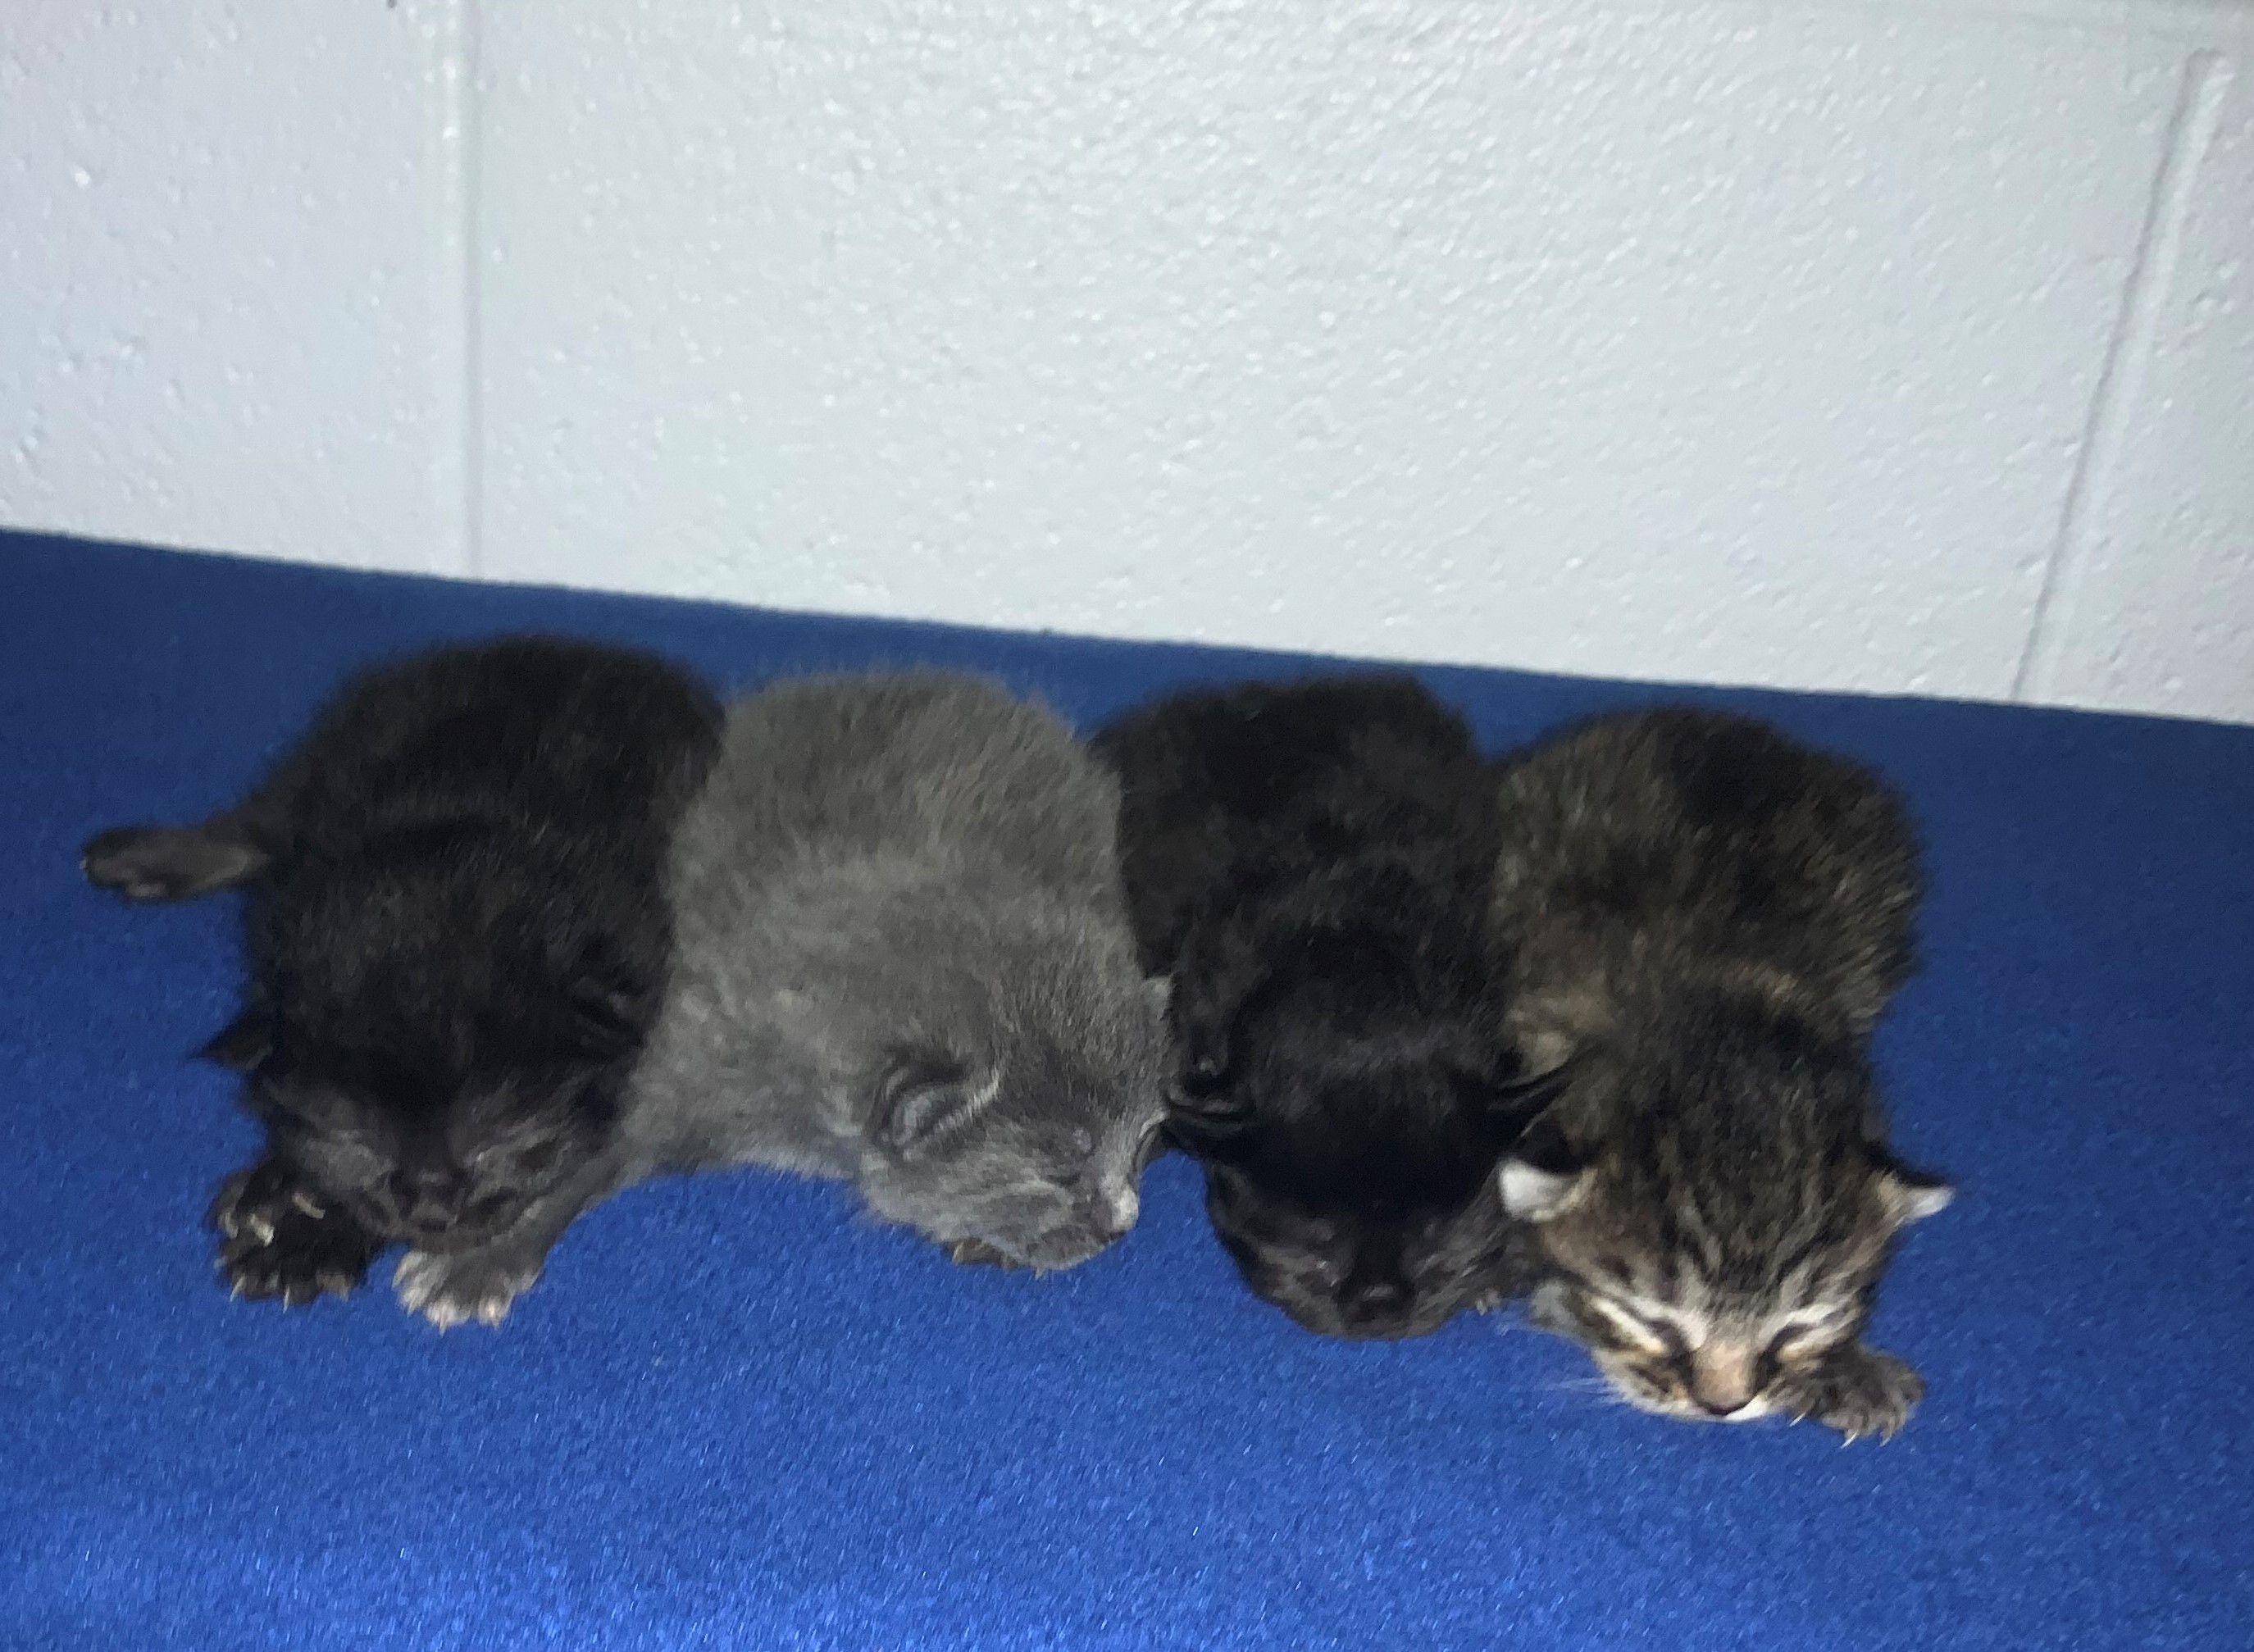 Four young kittens